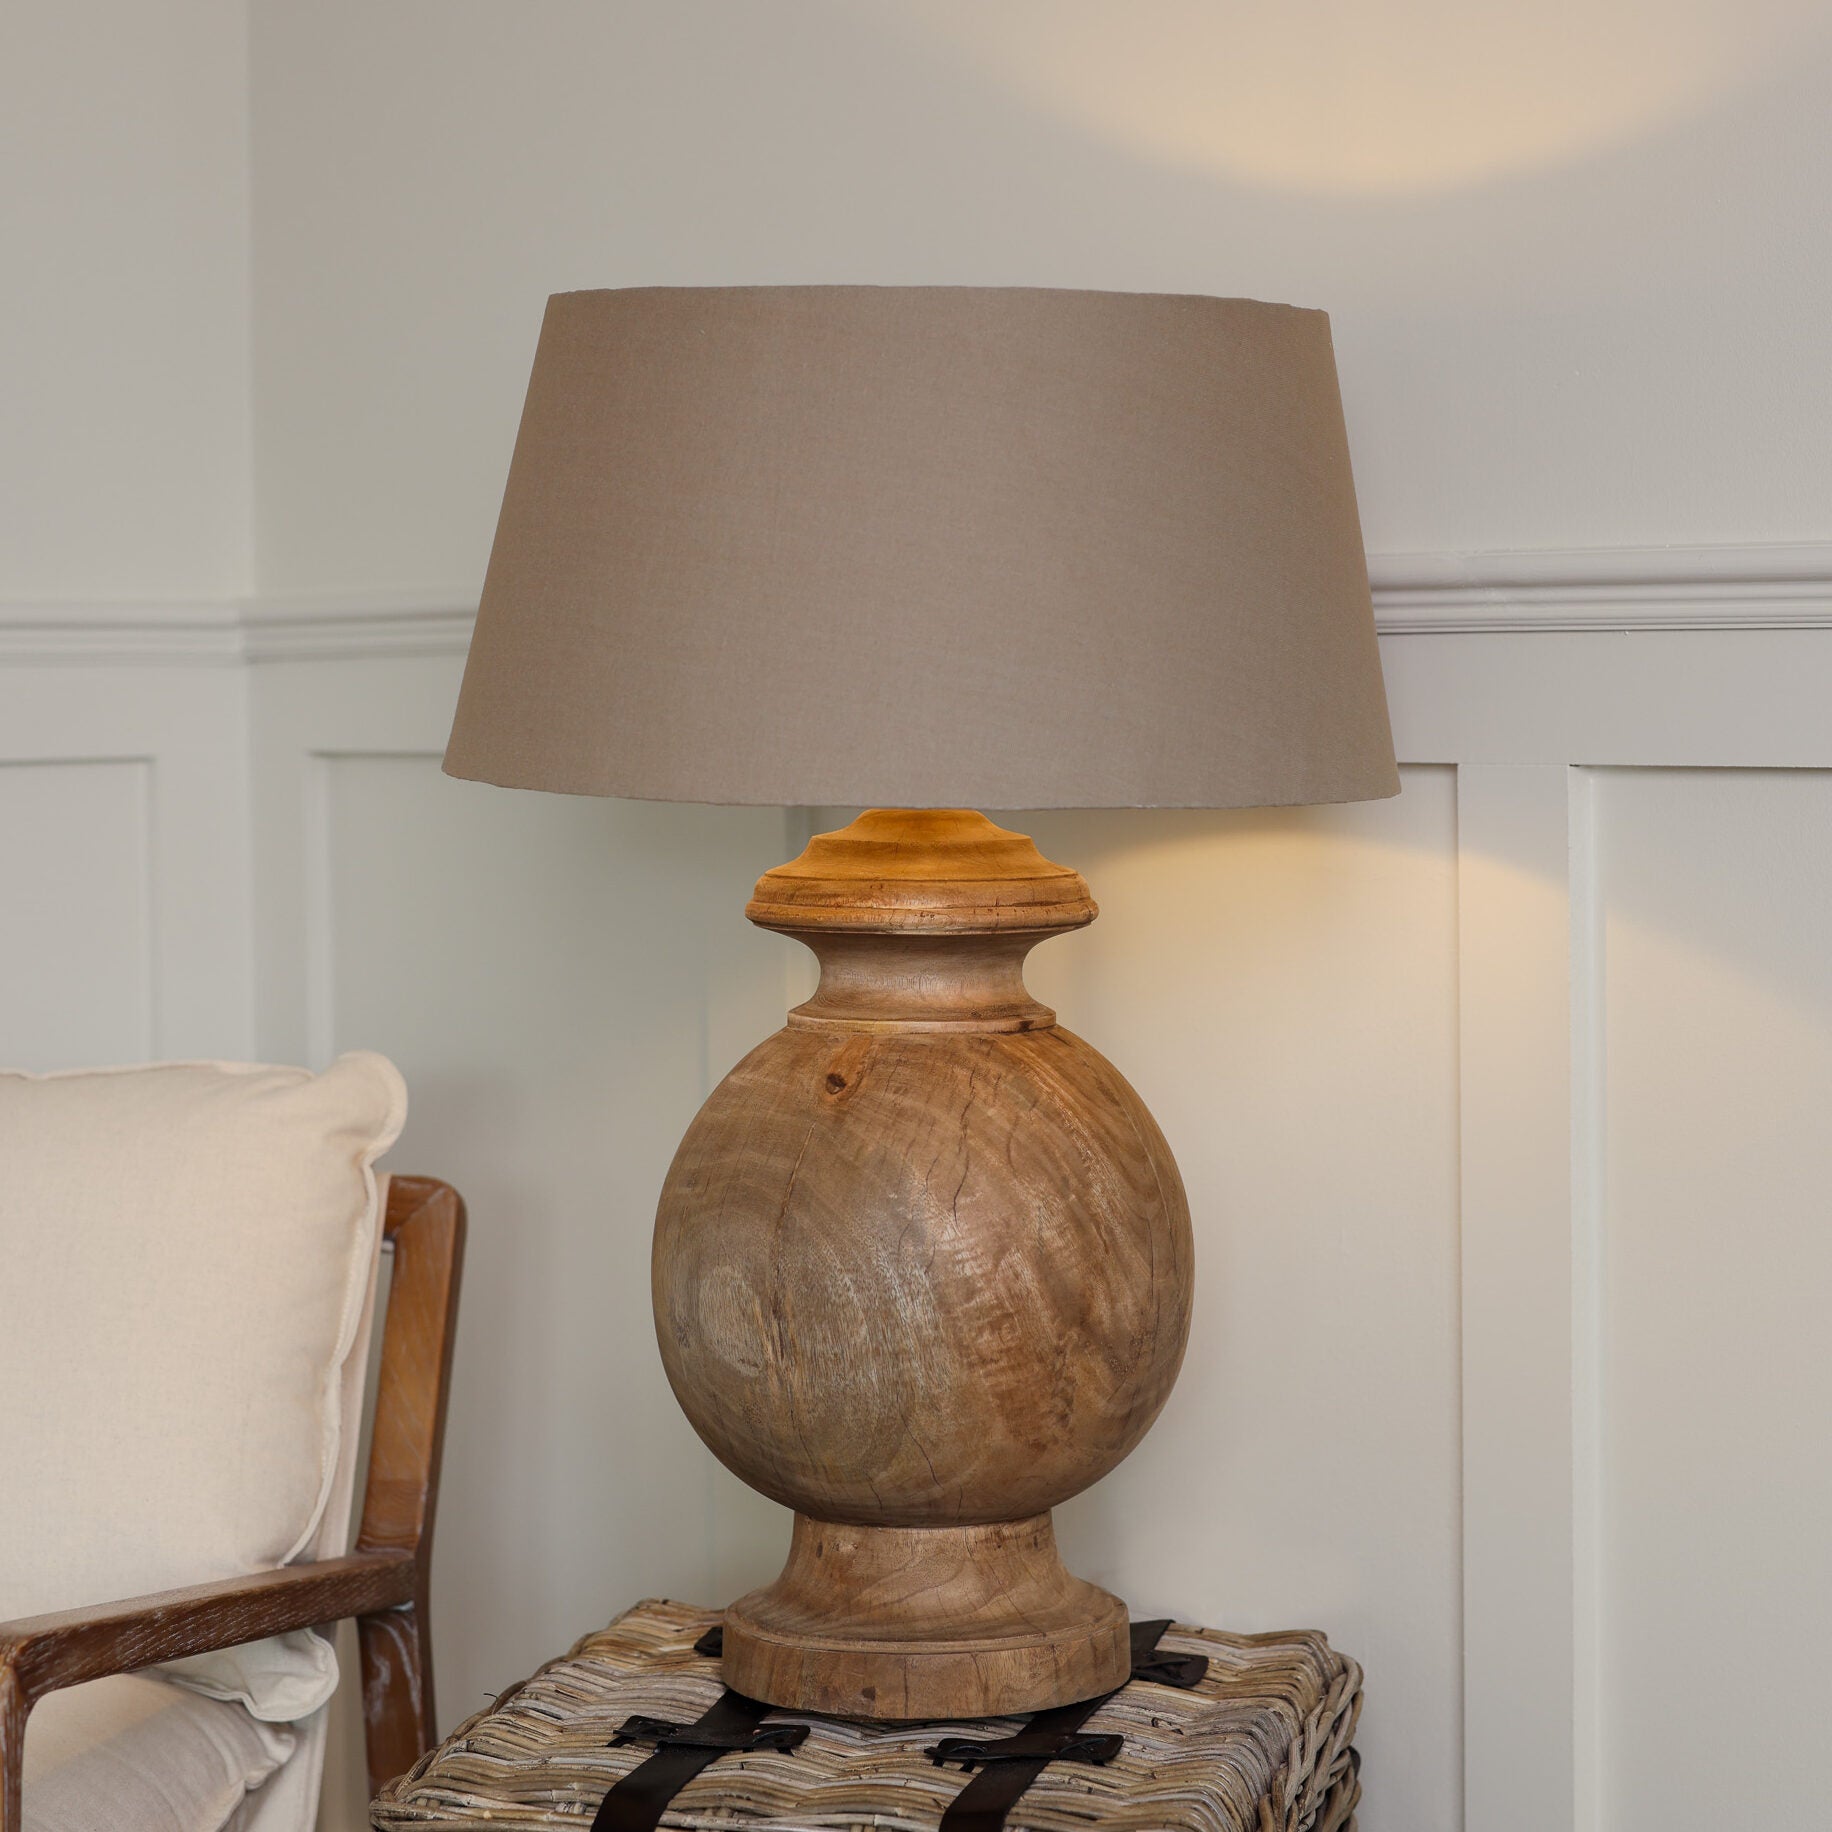 Large round wooden lamp with beige linen shade, on woven side table.